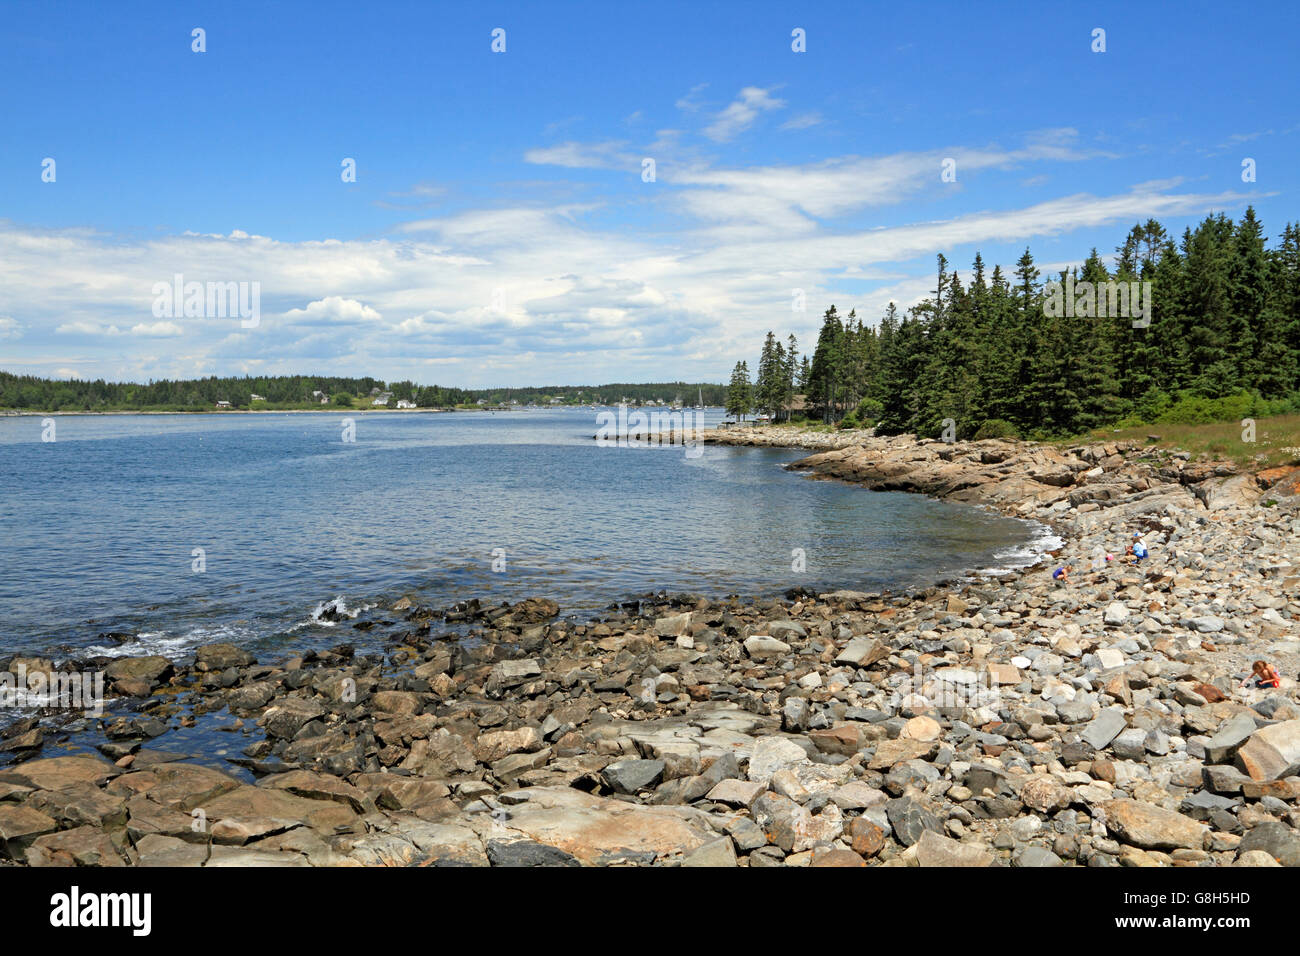 The shoreline at Port Clyde, Maine, USA Stock Photo